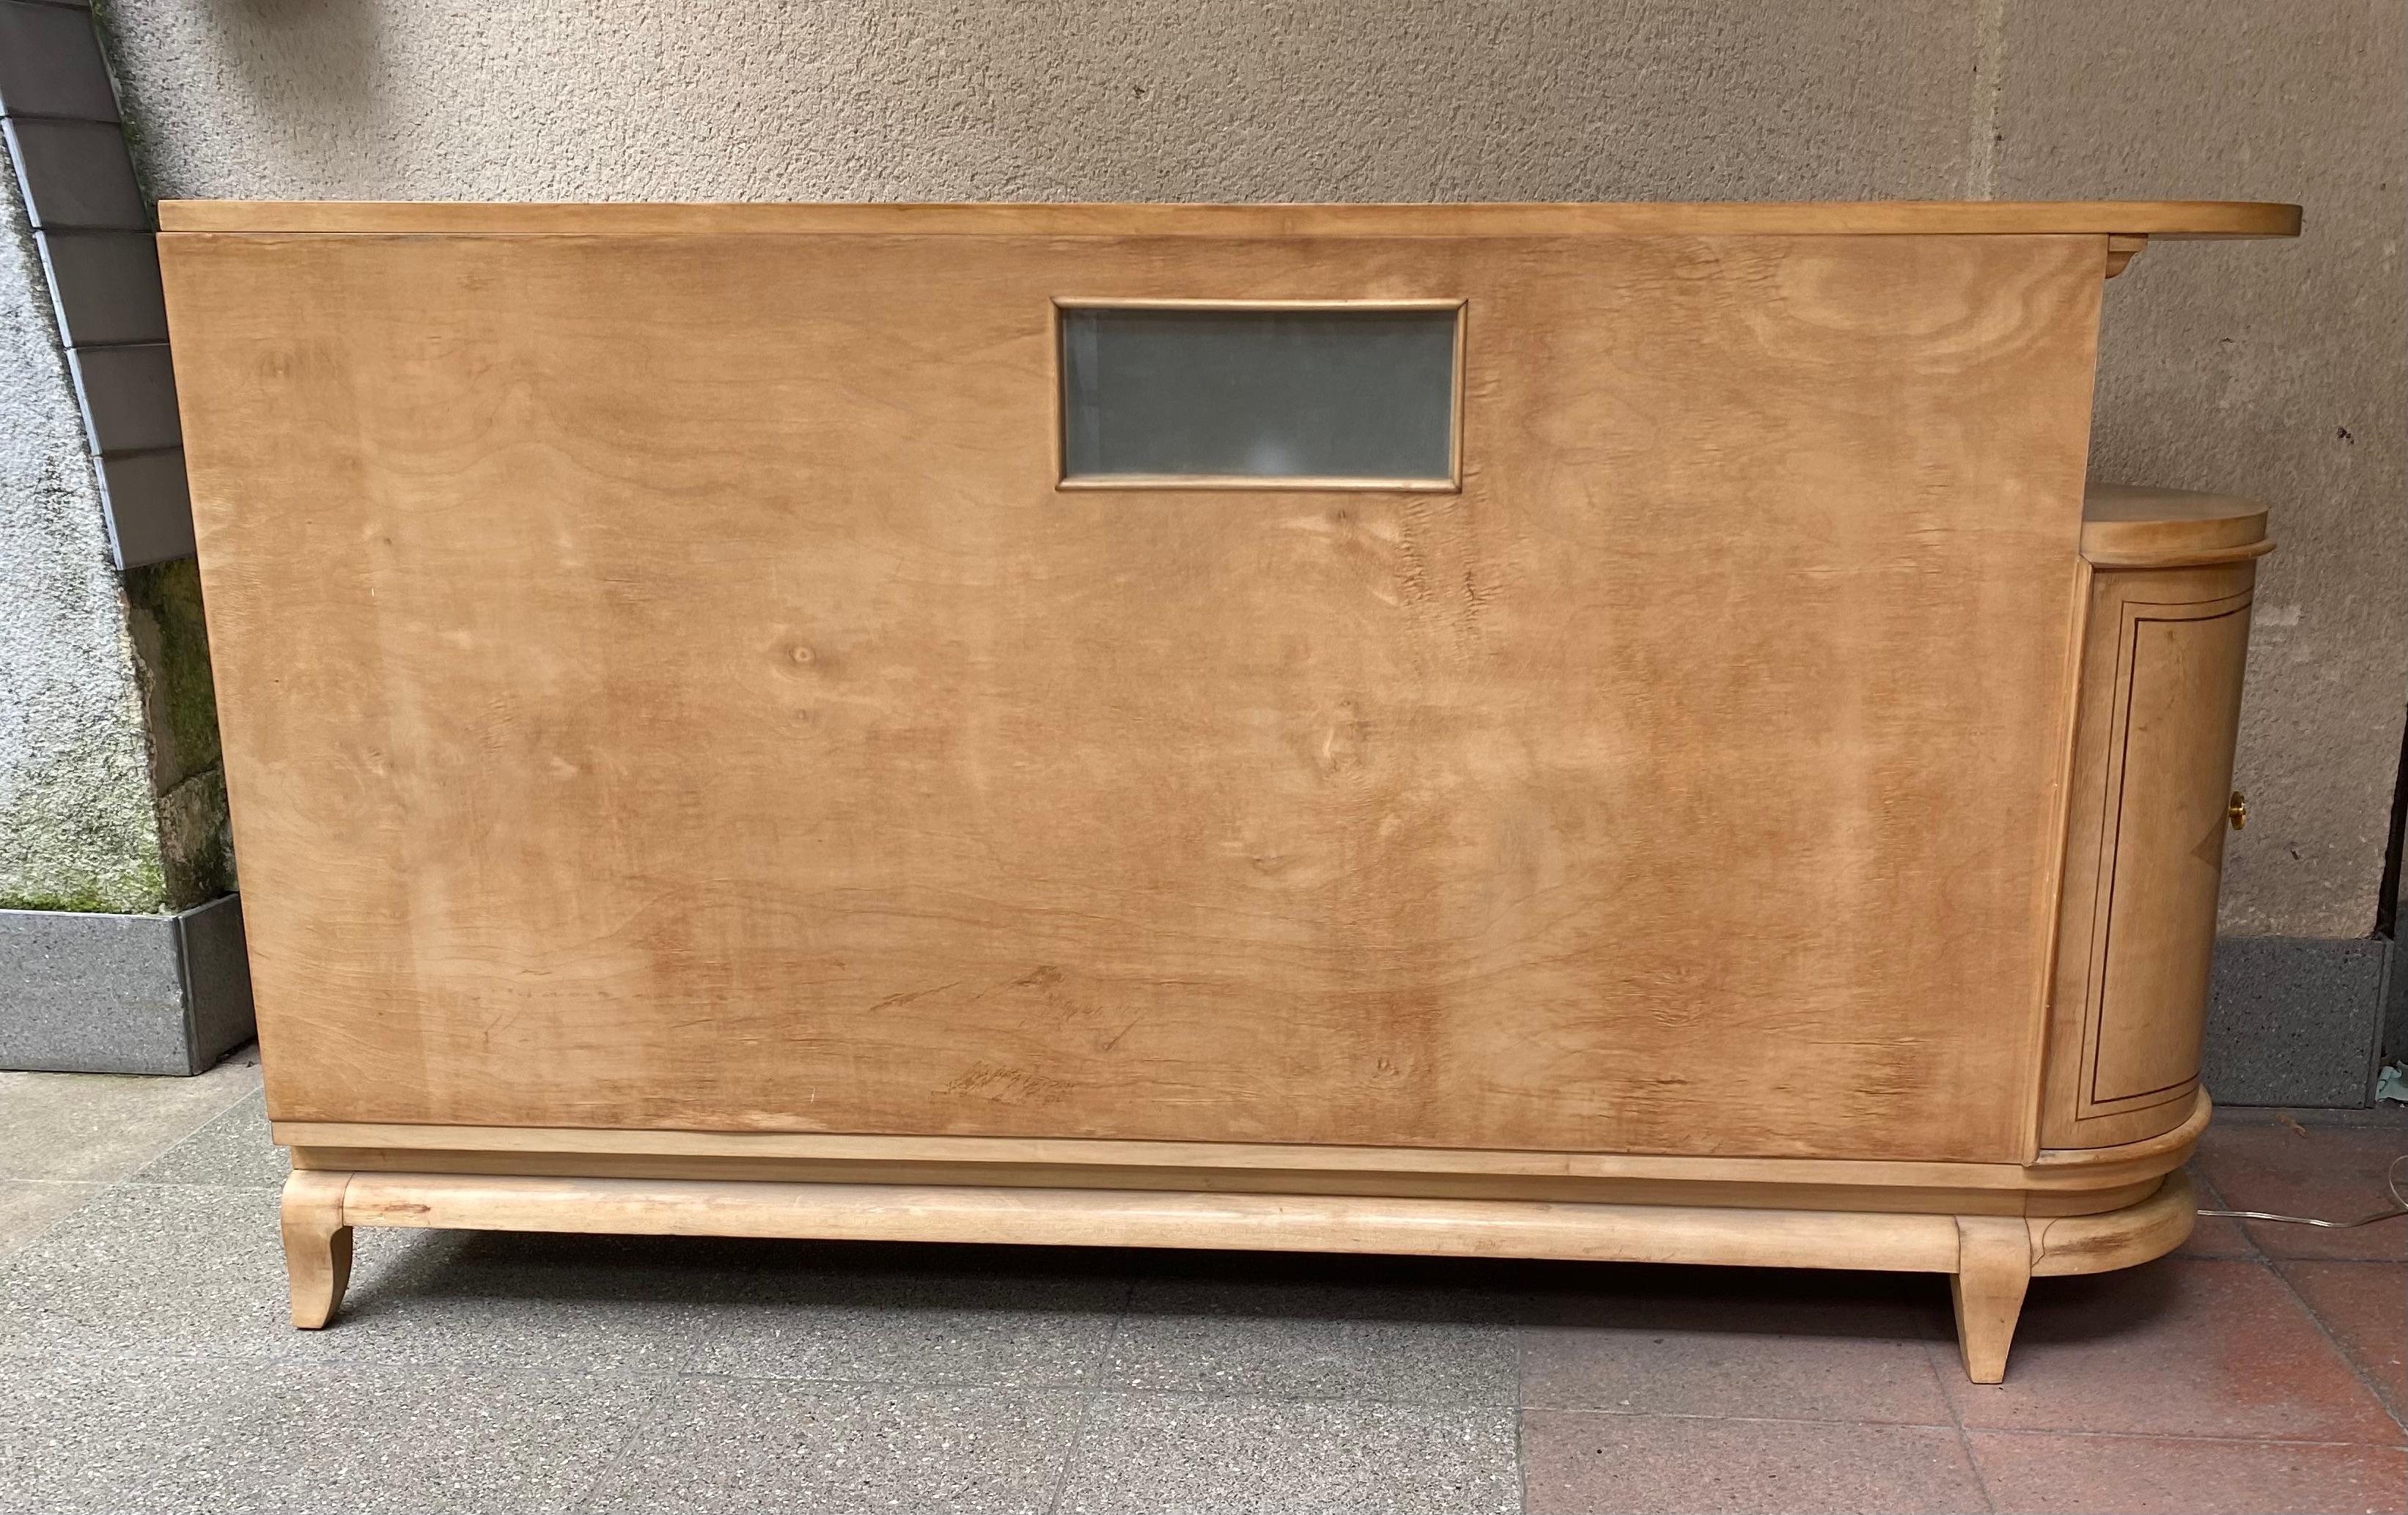 Sideboard with bar
1960
Sliding top and drawer
EU socket
Length 143 cm x H 83 cm x D 31 cm
Price : 1500 € for this table.